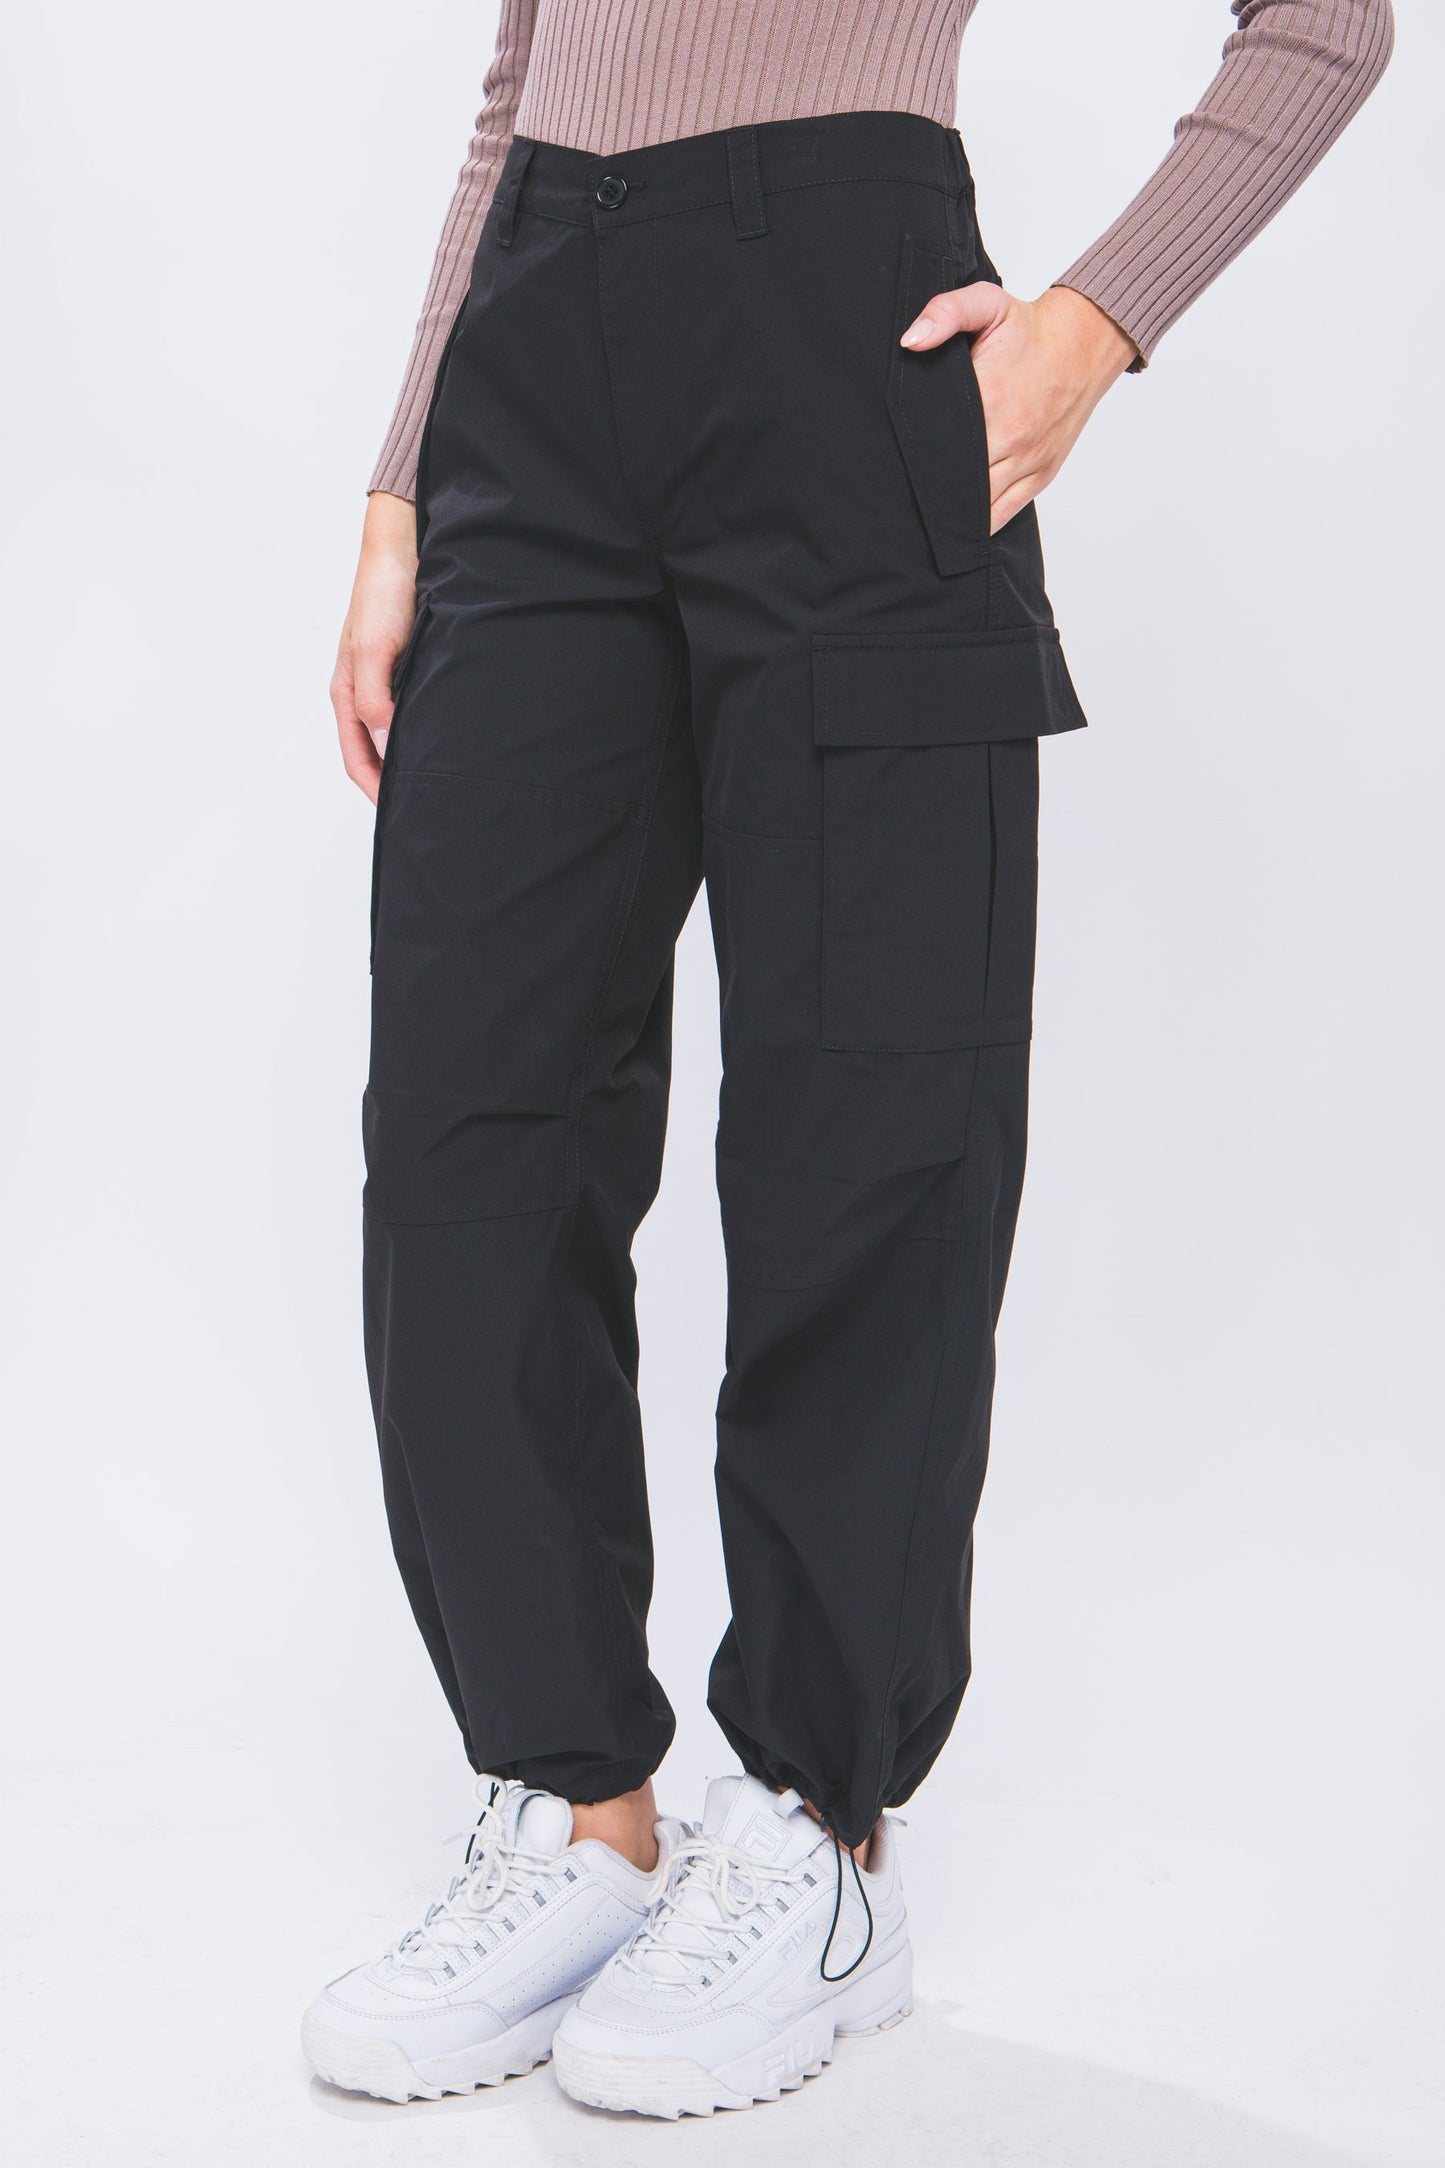 Blank Space Cargo Pant